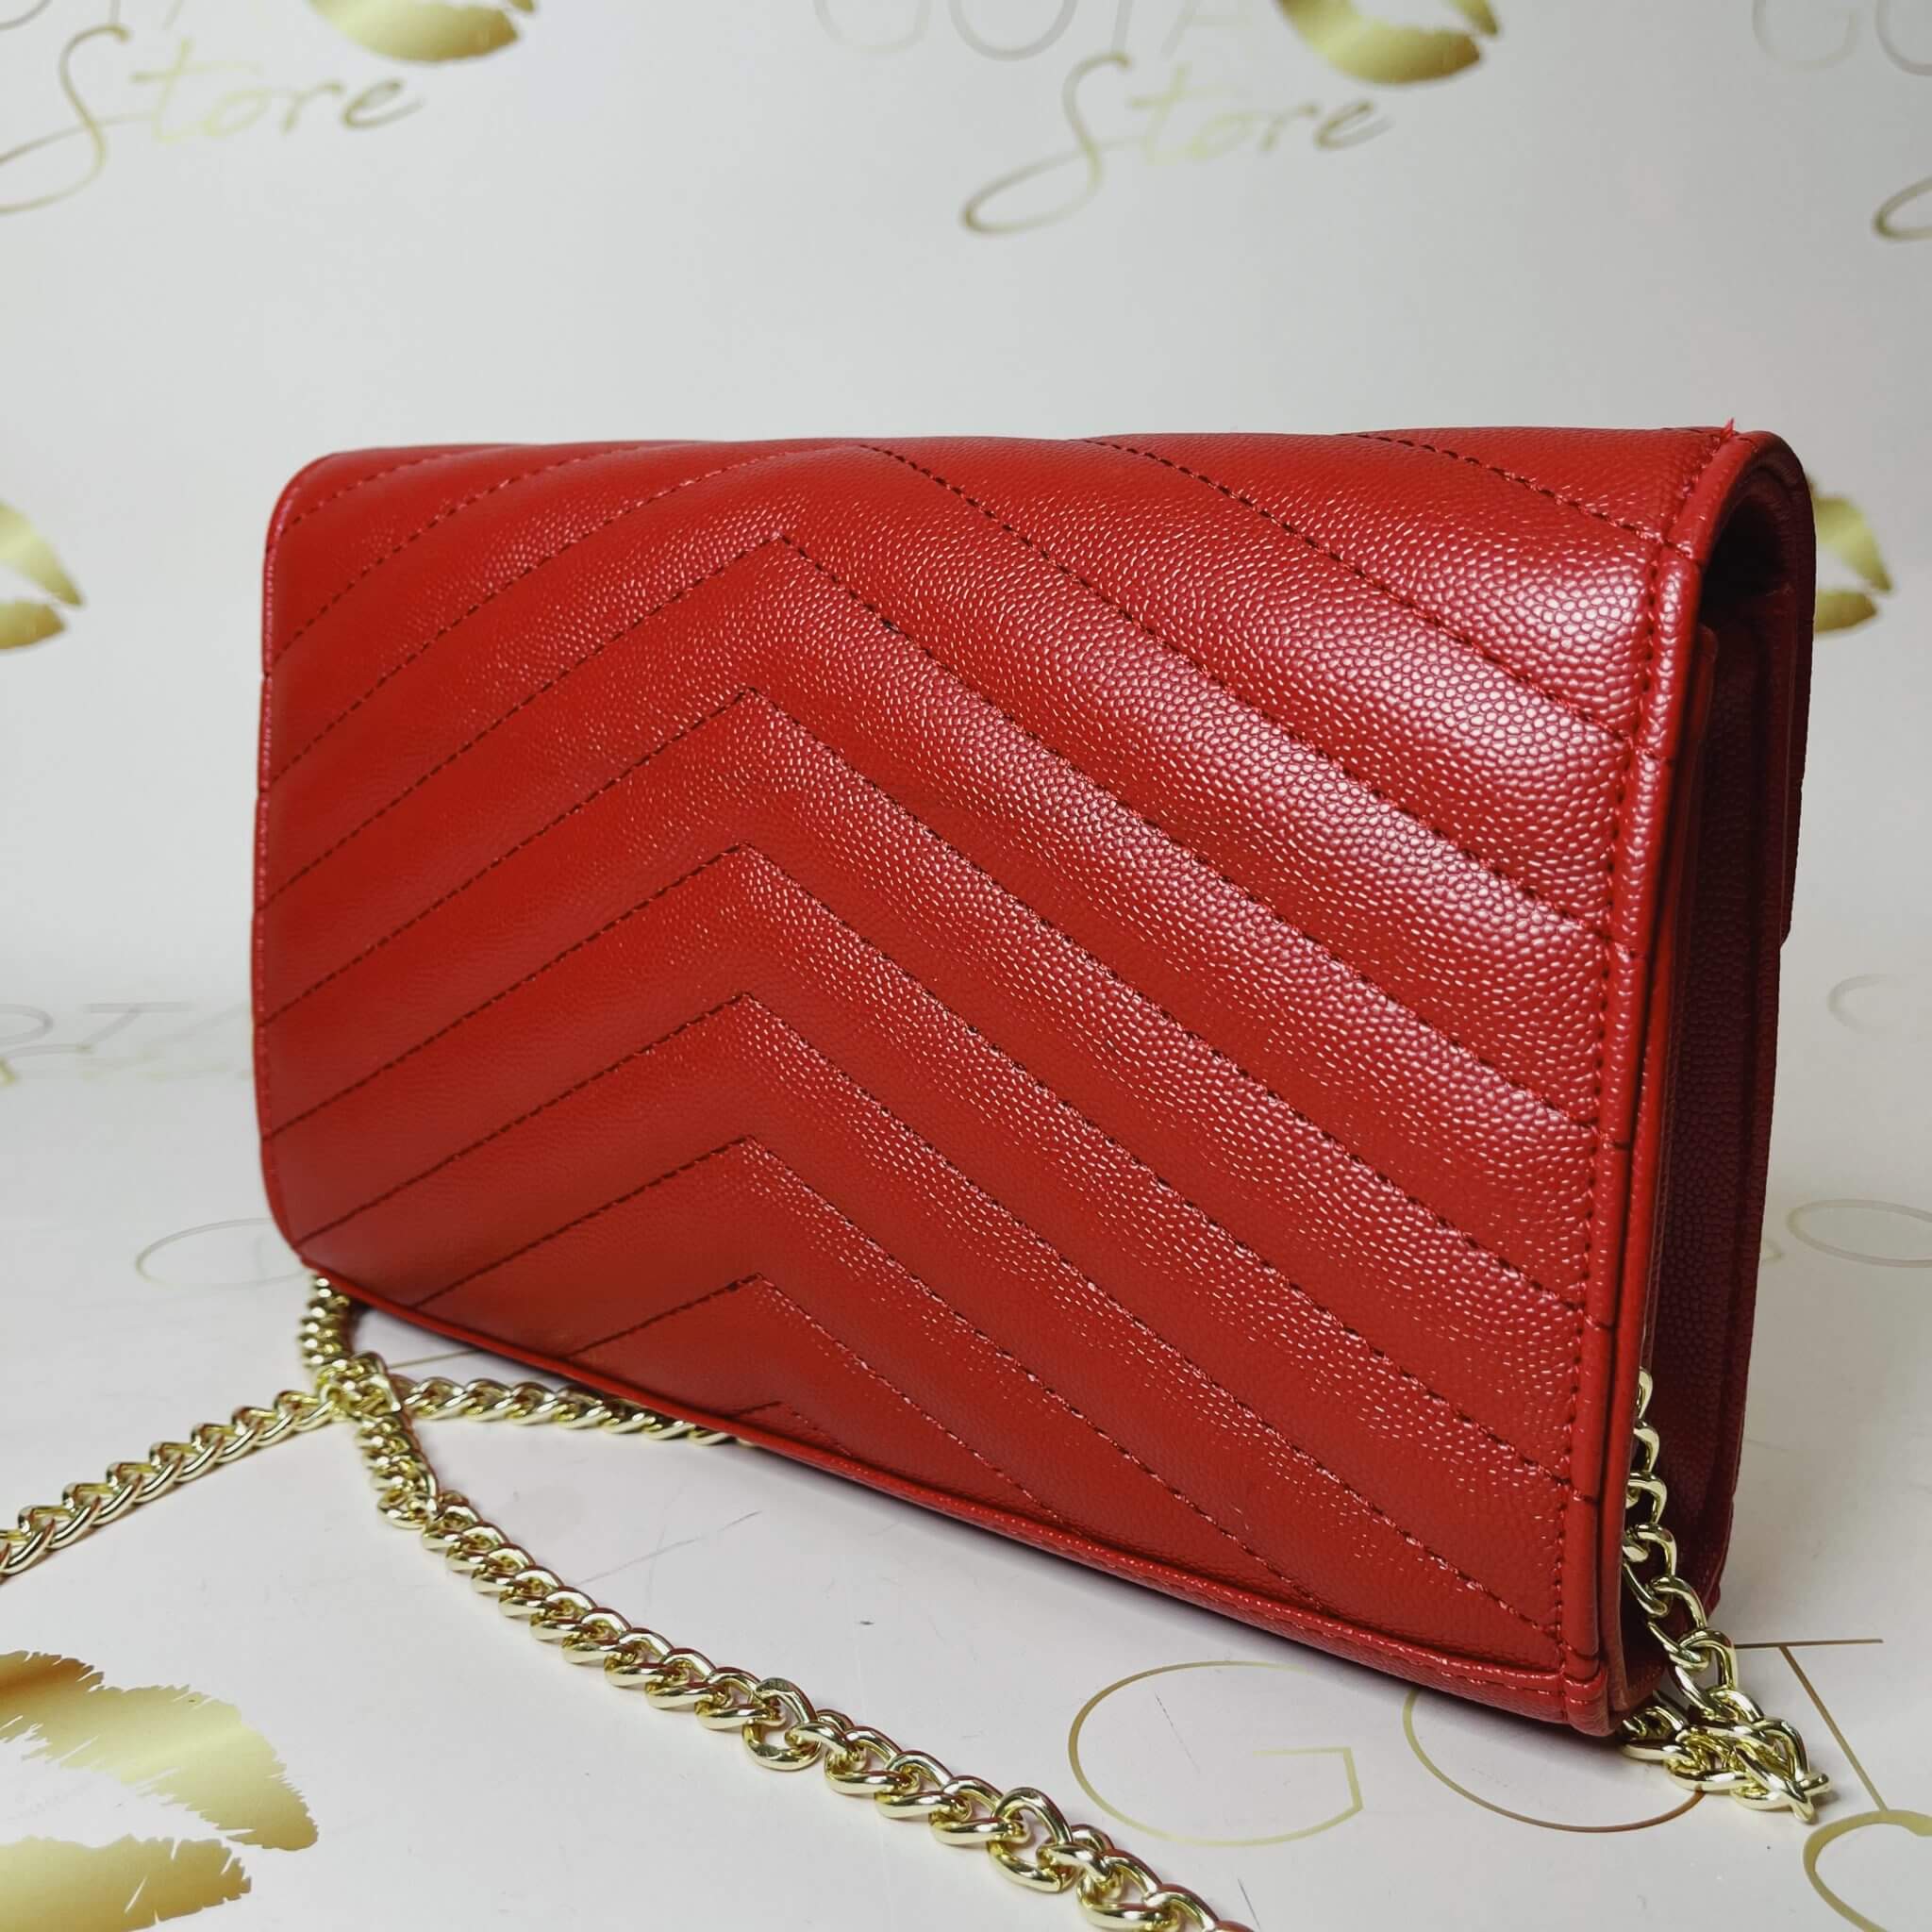 Quilted LouLou YSL Red Clutch Bag - Leather Women's Medium Purse - GOTA ...